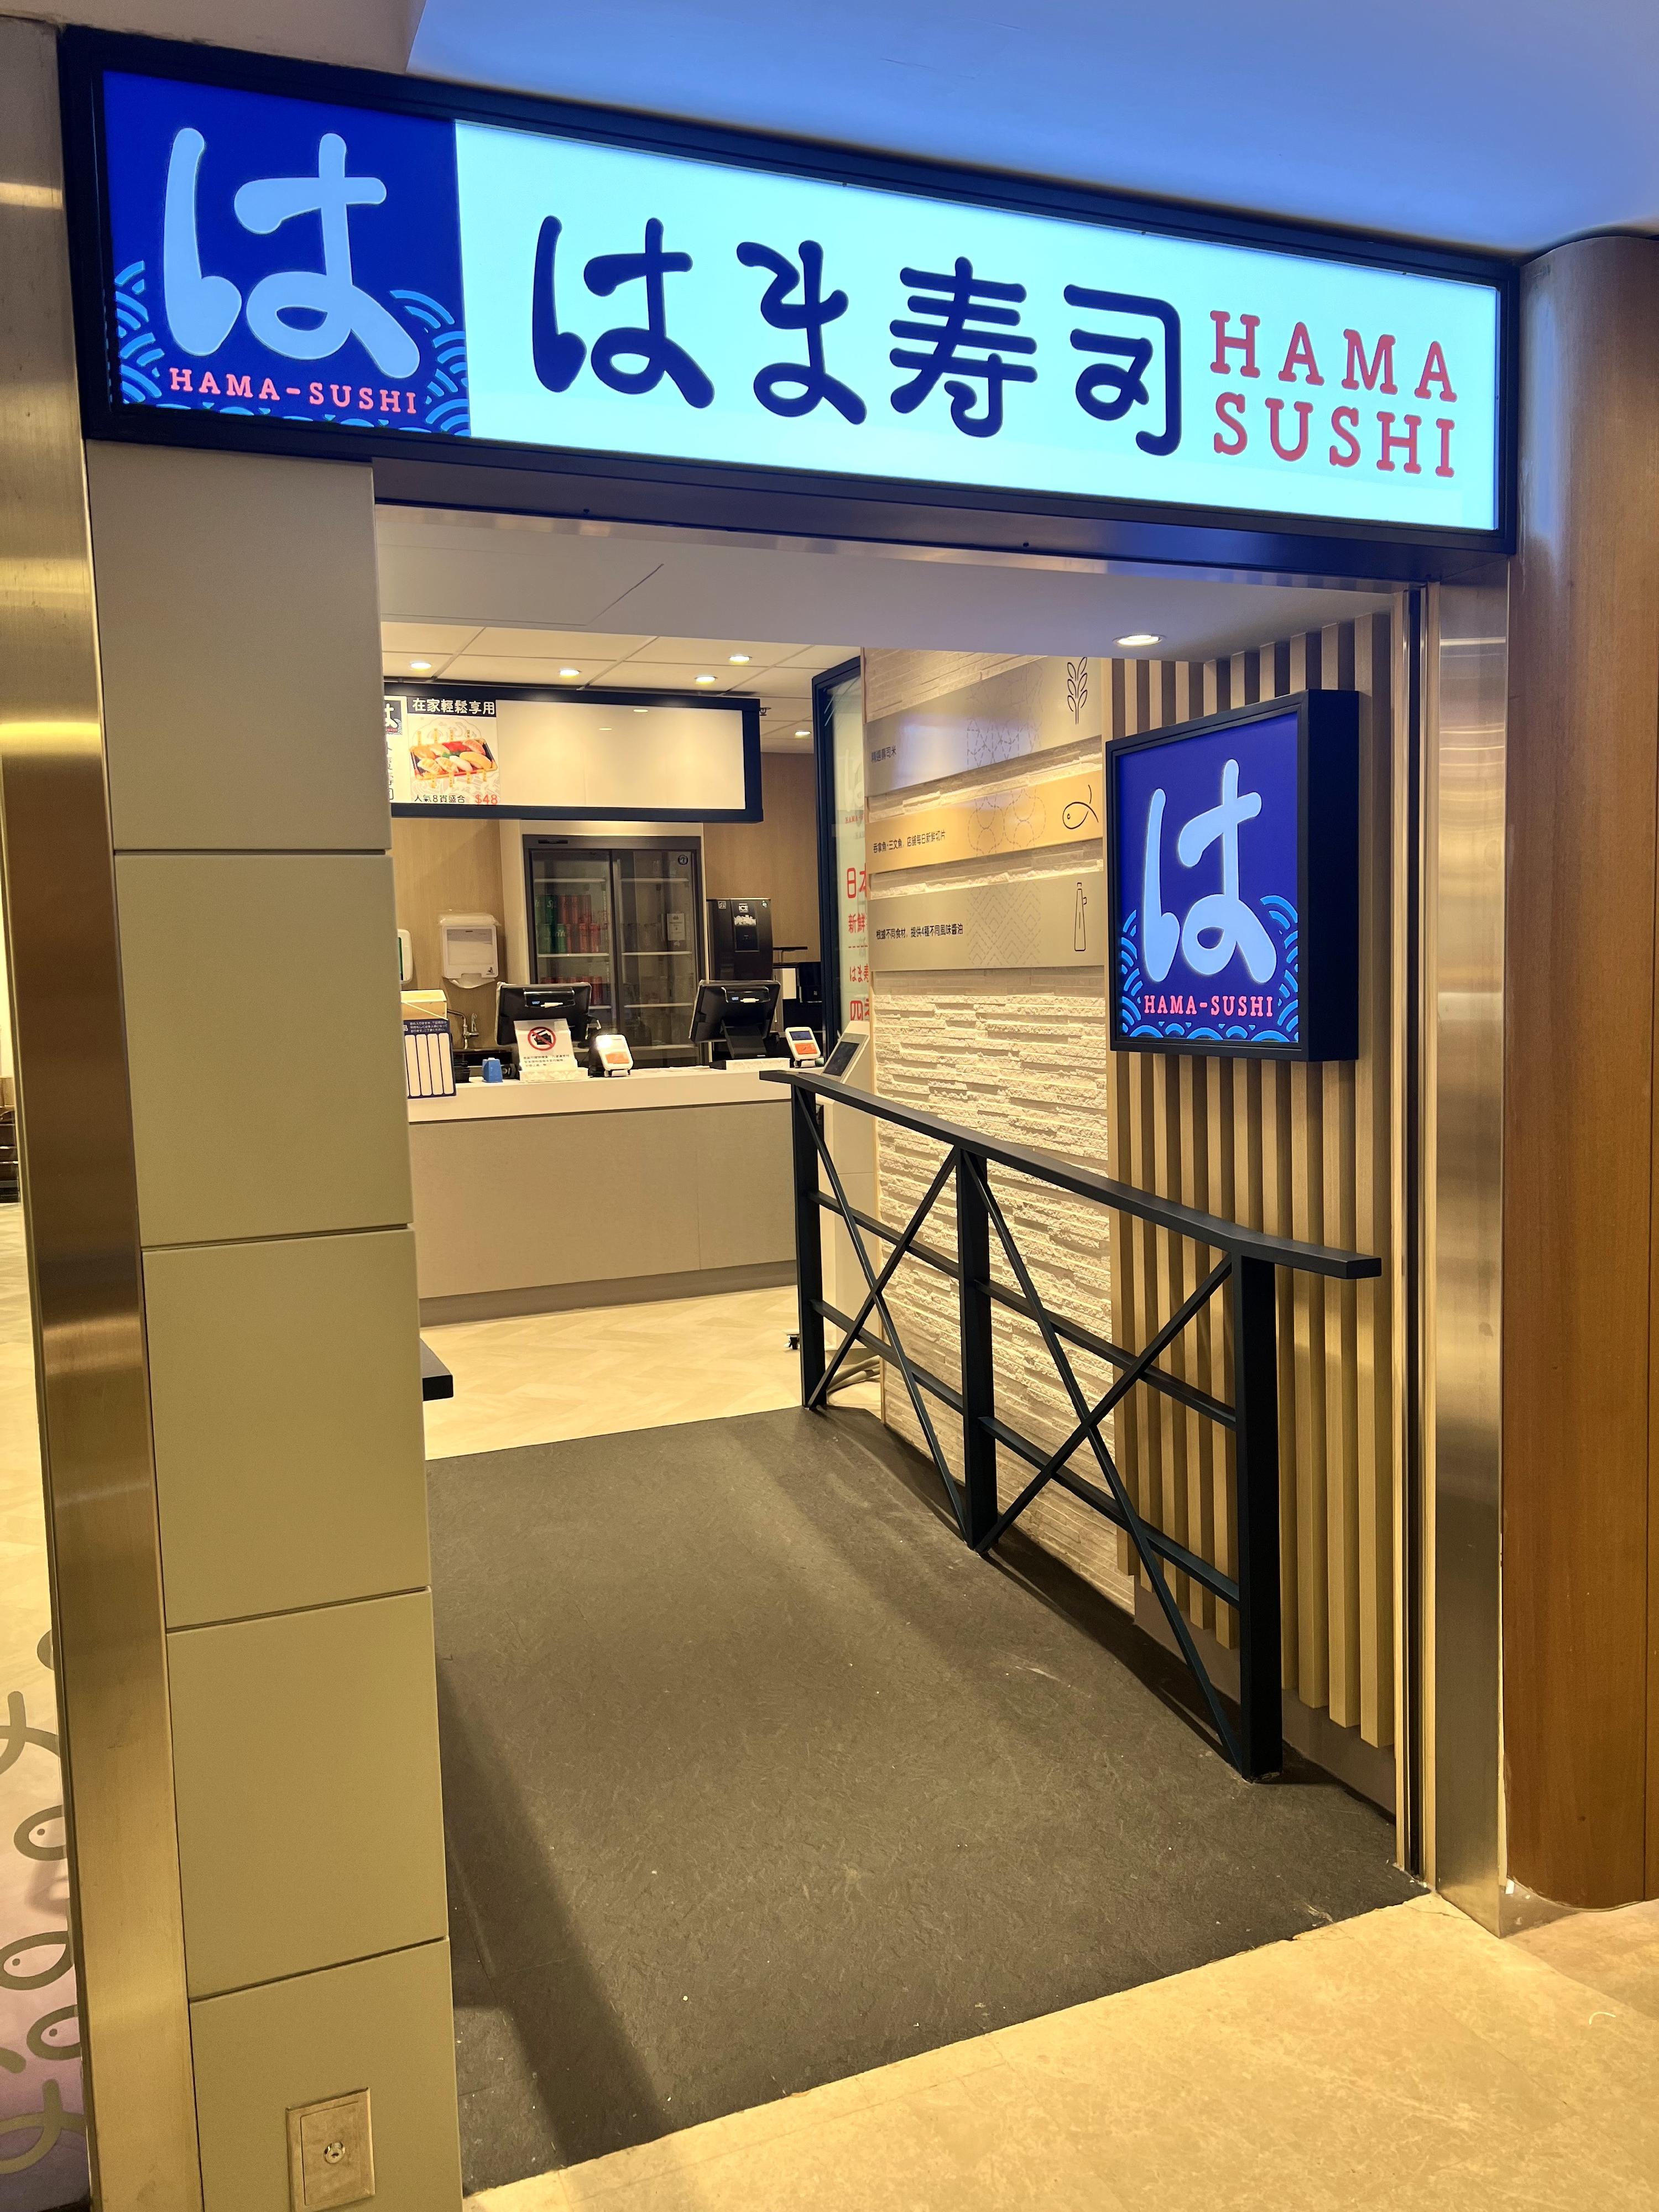 Japanese restaurant group Zensho Holdings Co Ltd opened its first HAMA-SUSHI conveyor belt restaurant in Hong Kong today (June 29), offering a wide range of sushi and side dishes at affordable prices. Photo shows its first store in Jordan. 



